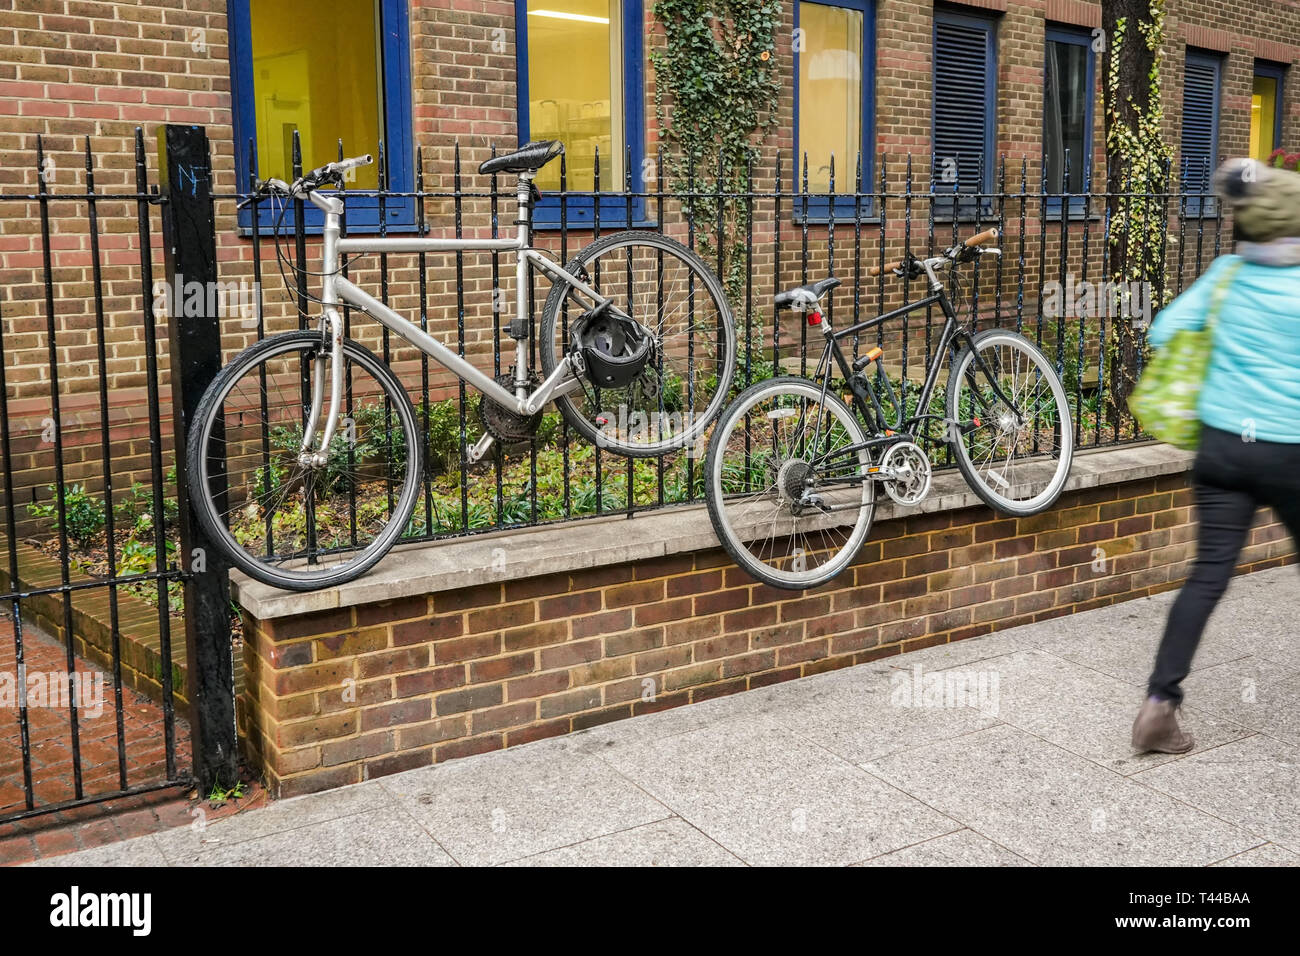 Old bicycles locked to metal fence, high above ground, blurred person passing by on pavement Stock Photo